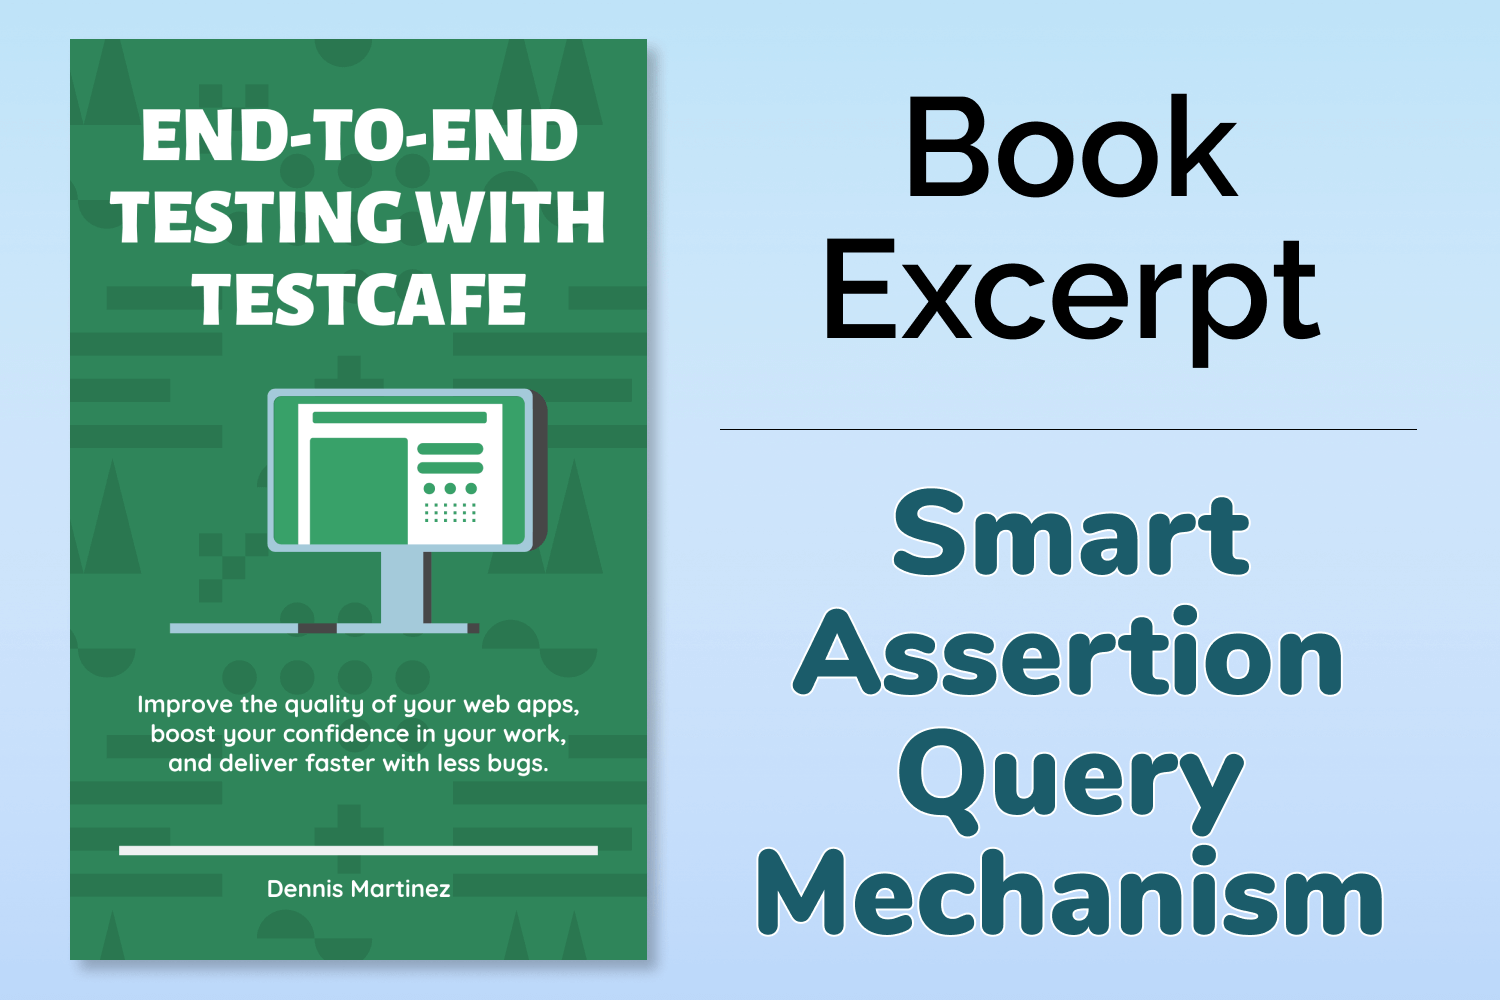 End-to-End Testing with TestCafe Book Excerpt: Smart Assertion Query Mechanism